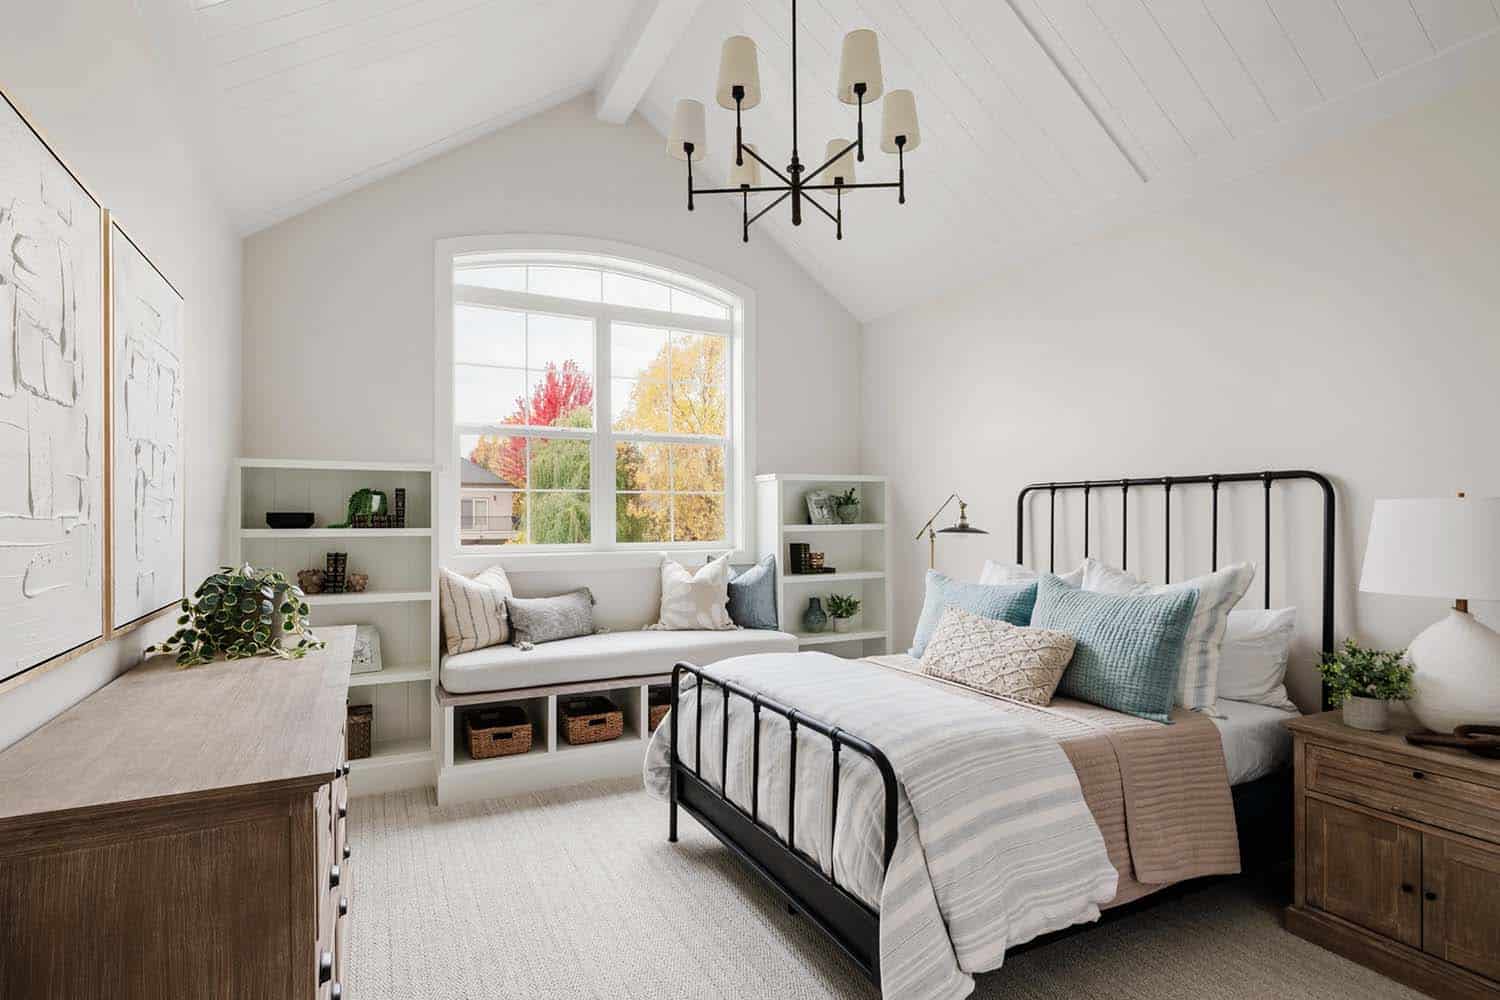 coastal-style-bedroom-with-a-built-in-window-seat